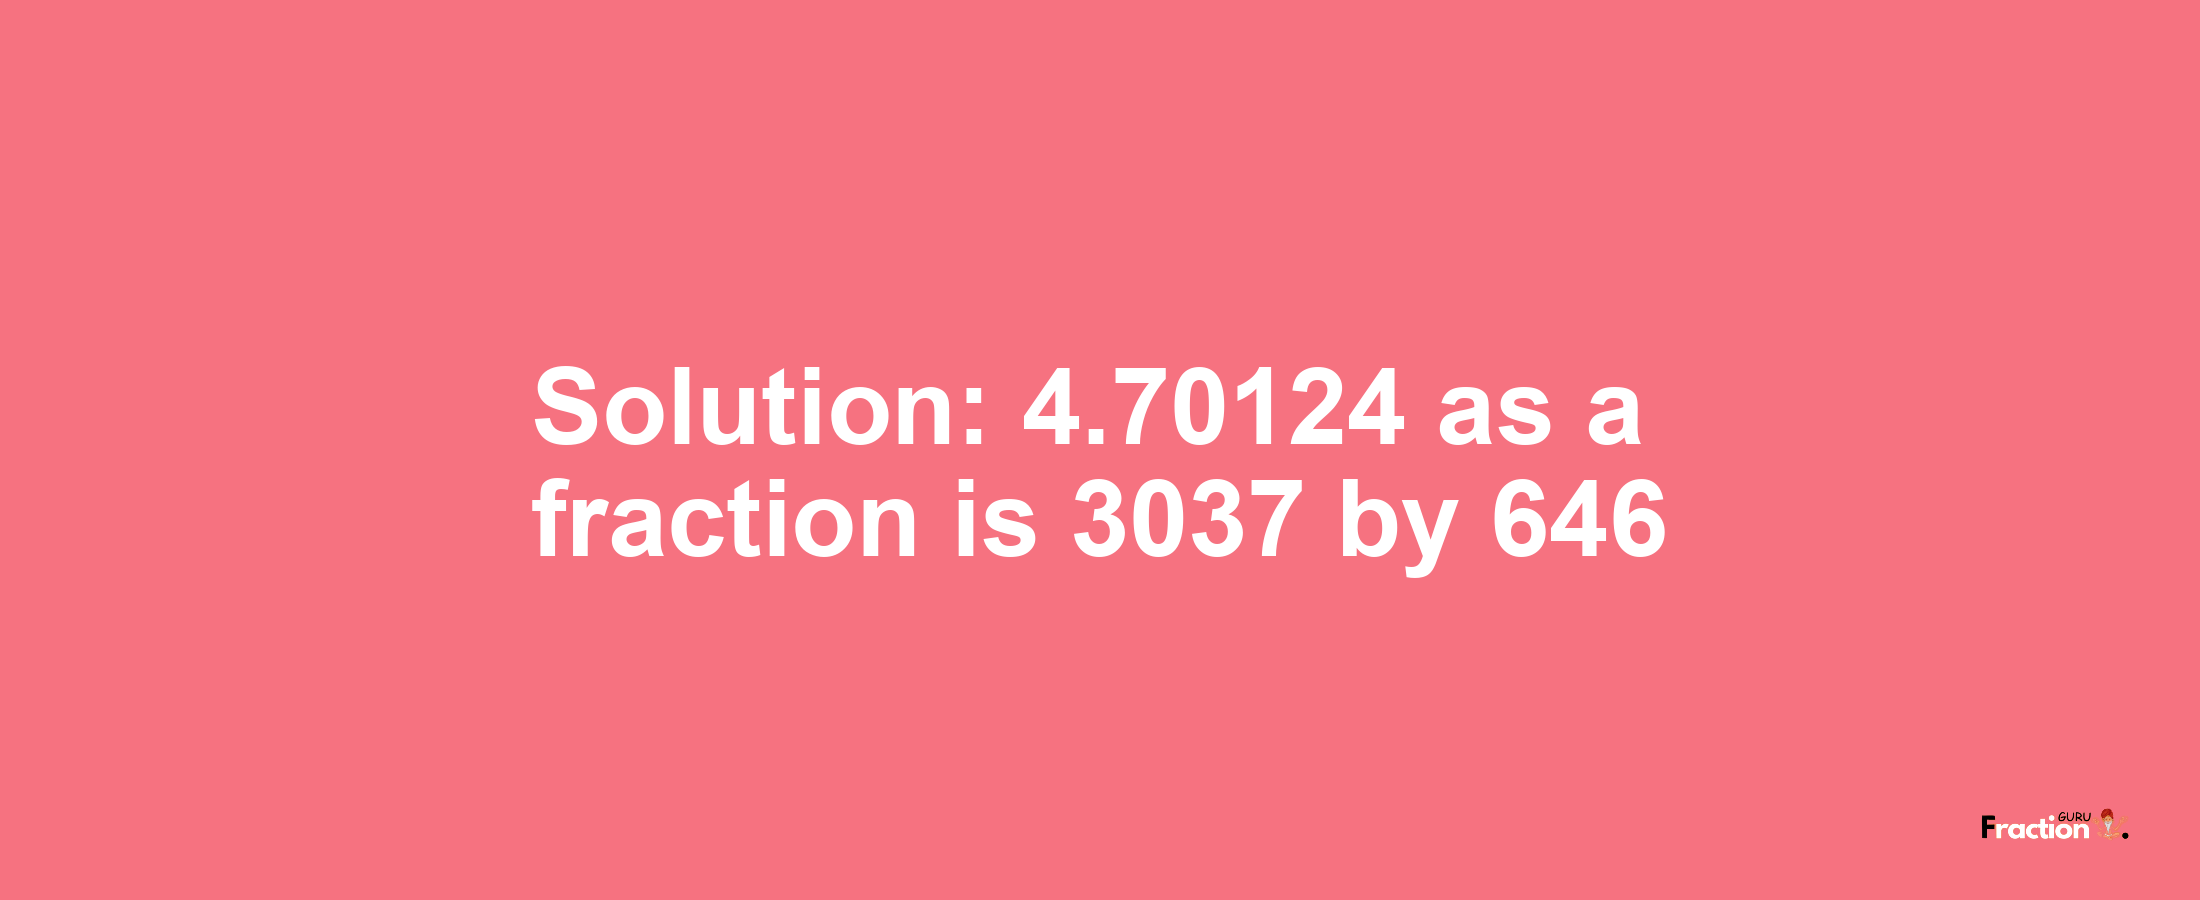 Solution:4.70124 as a fraction is 3037/646